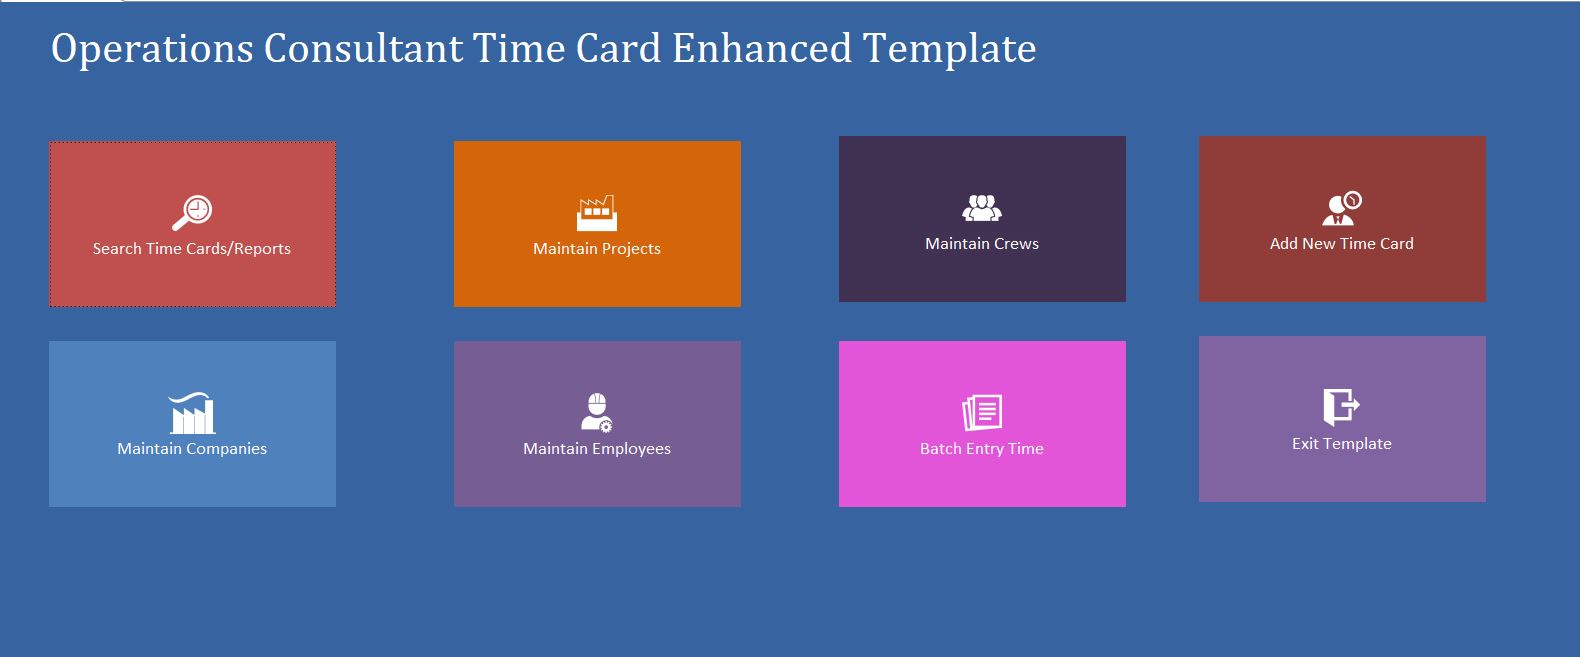 Enhanced Operations Consultant Time Card Template | Time Card Database